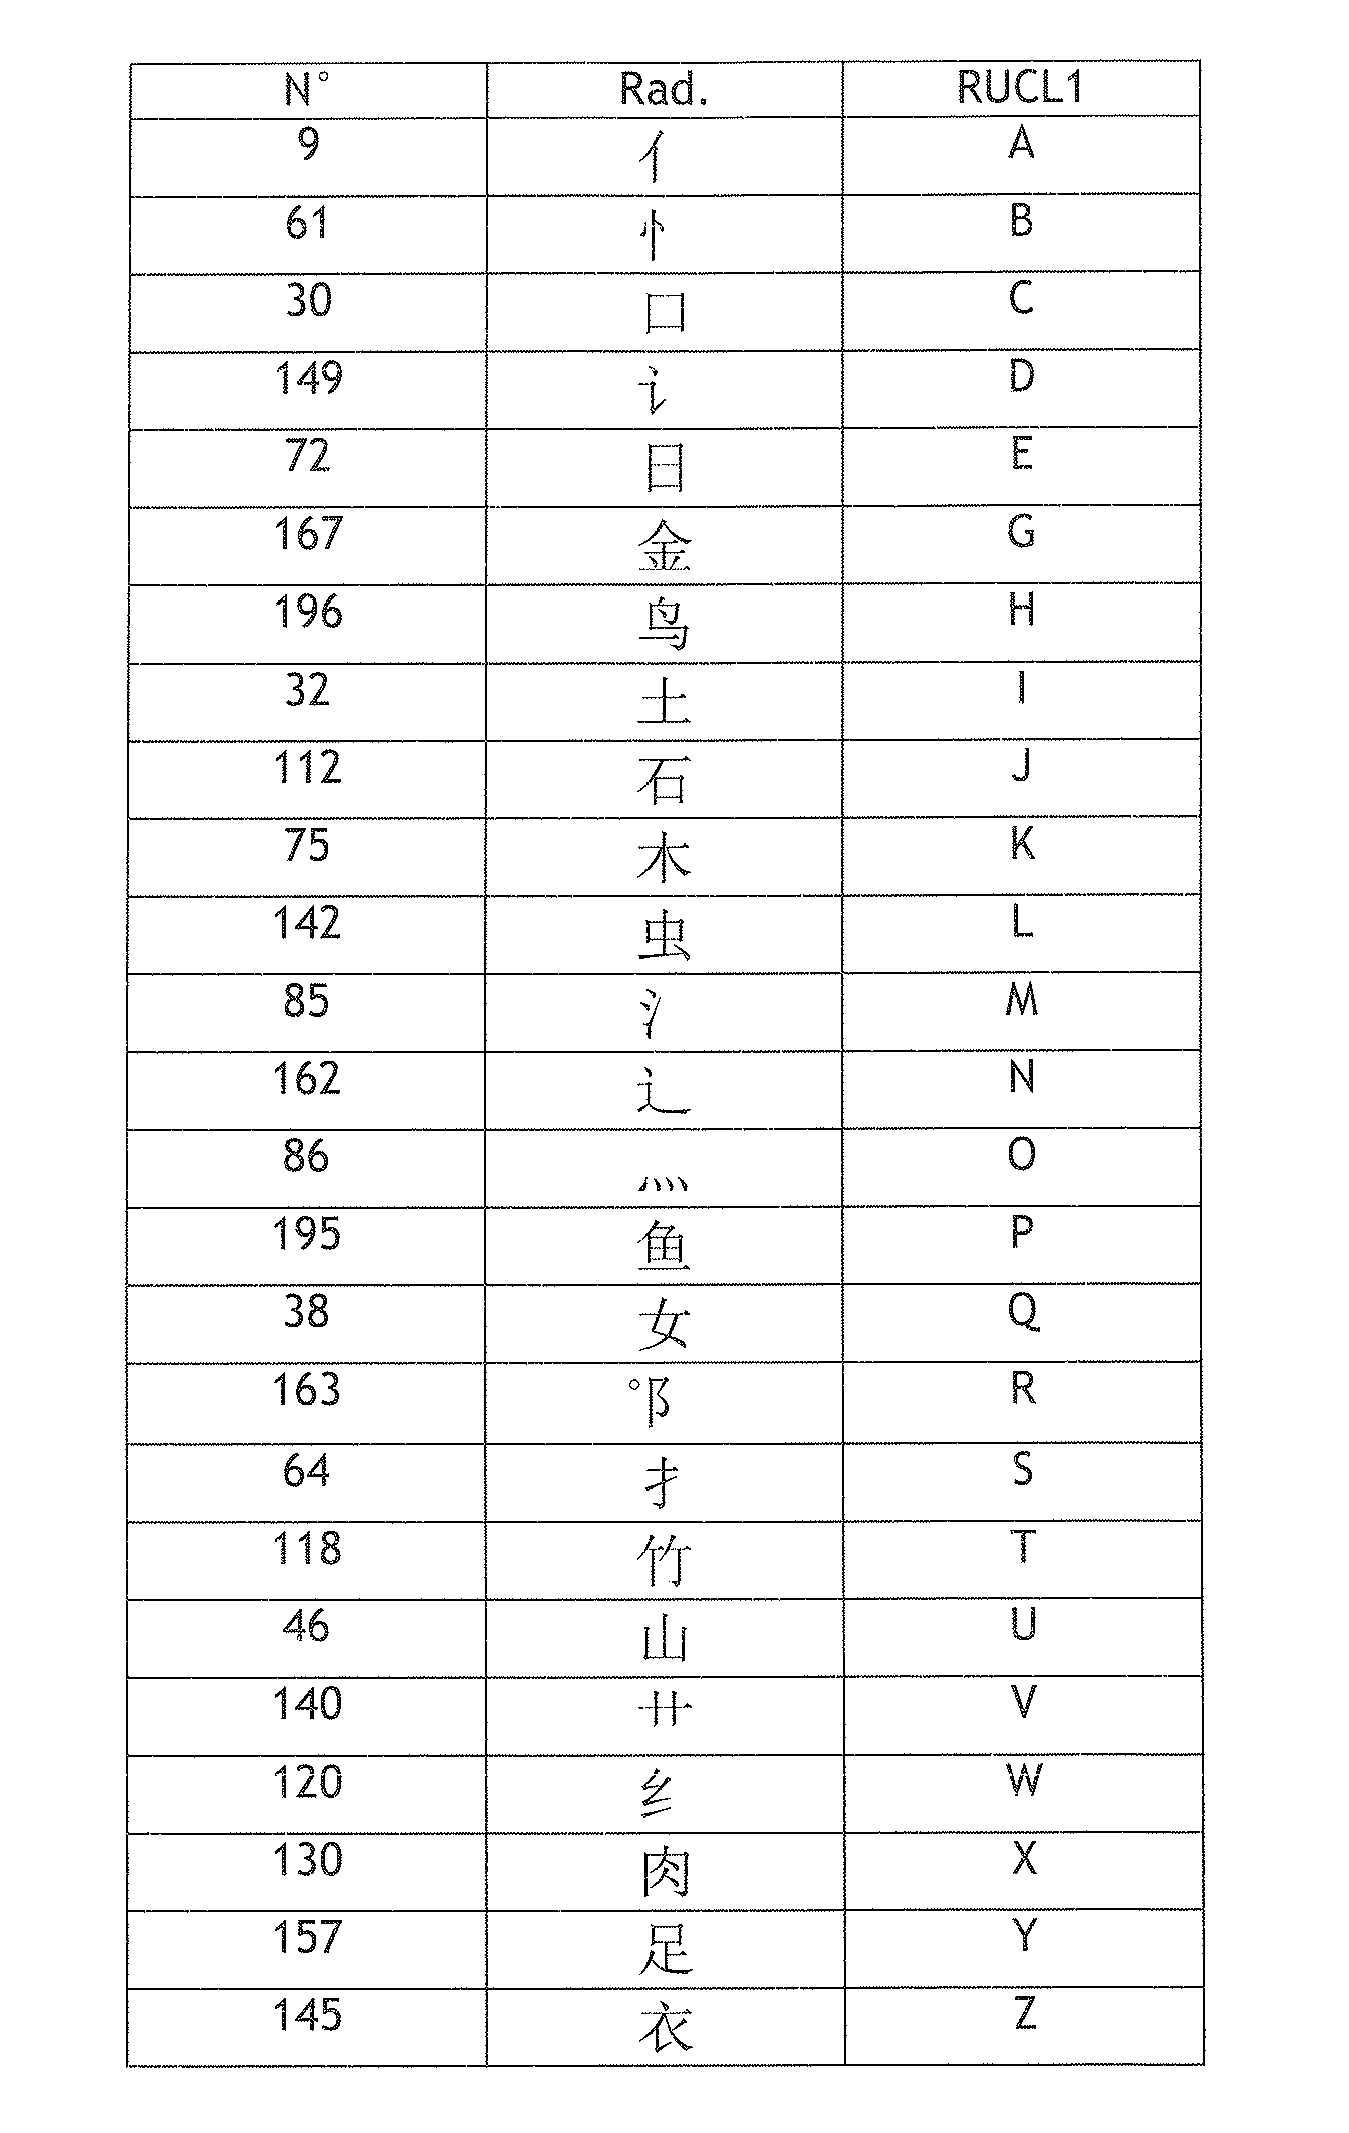 Transliterating methods between character-based and phonetic symbol-based writing systems